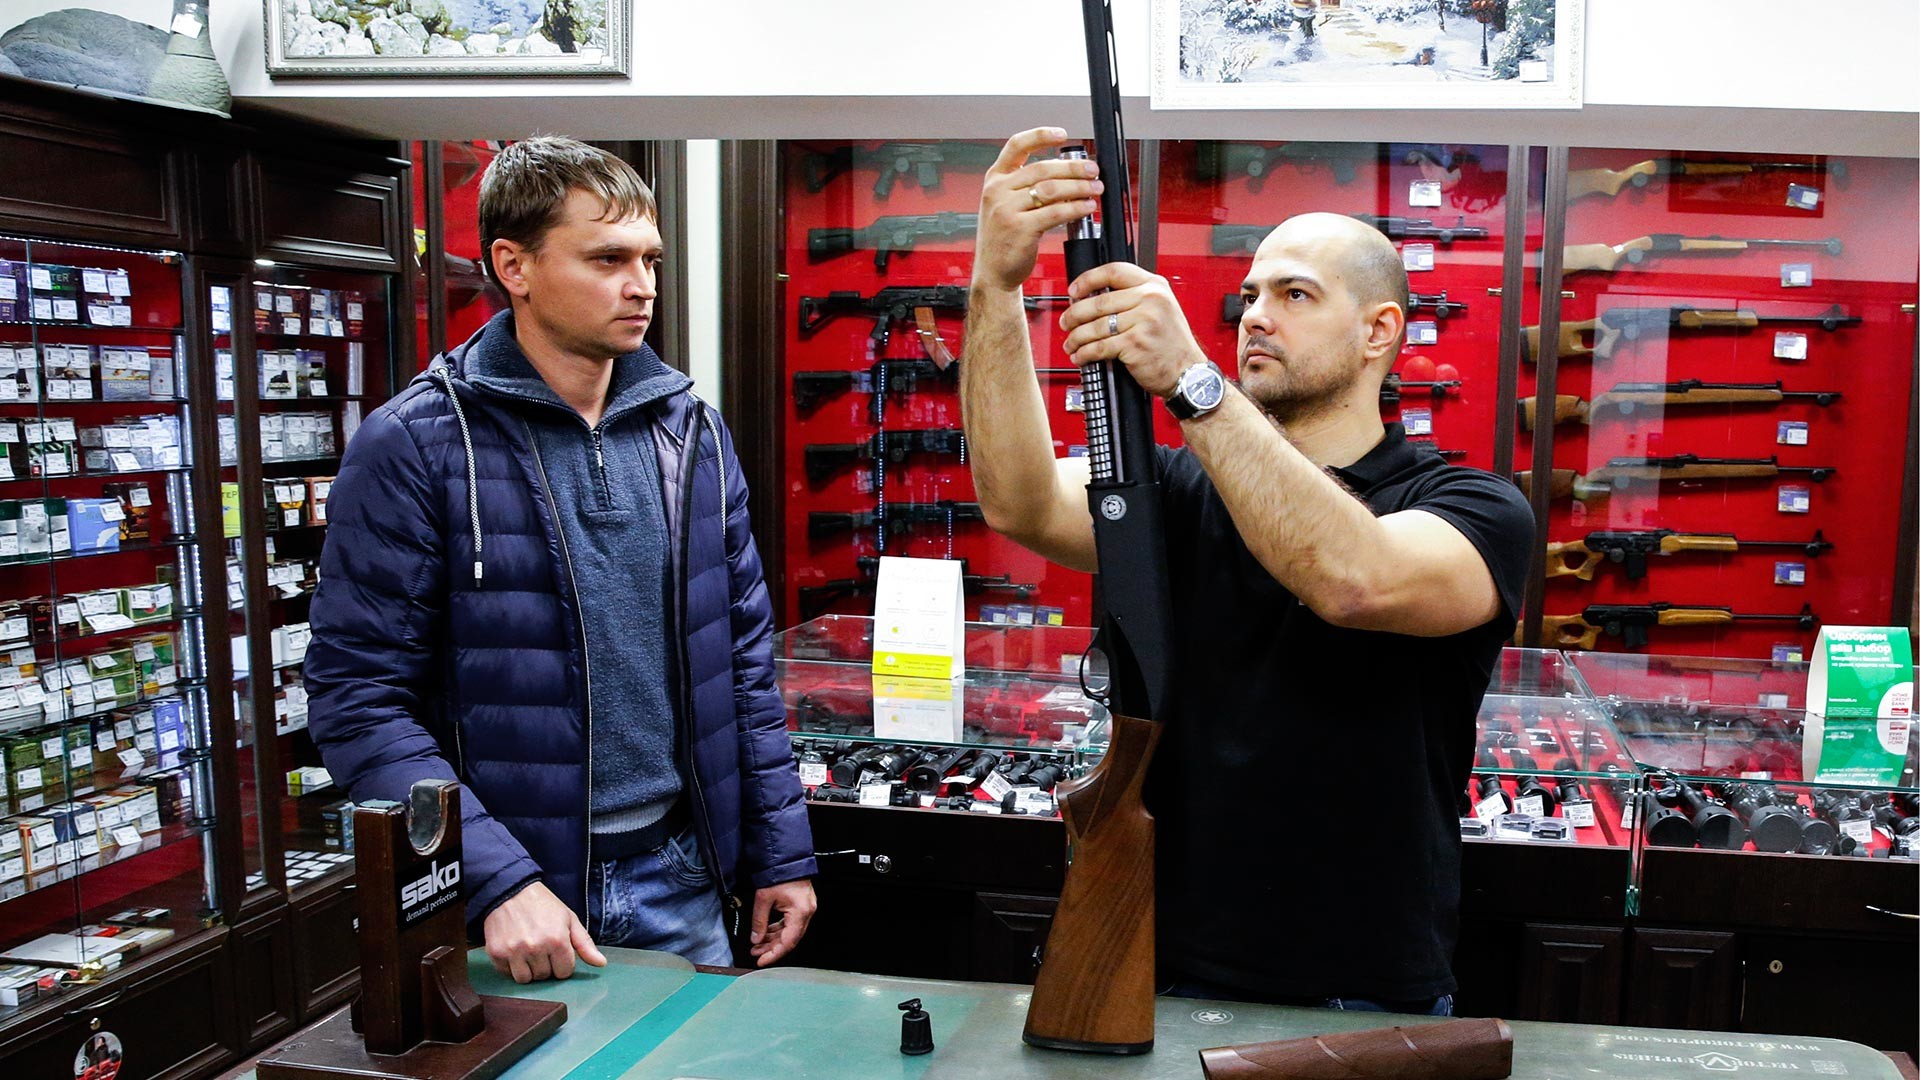 Customer's viewing a weapon in a store in Chelyabinsk.